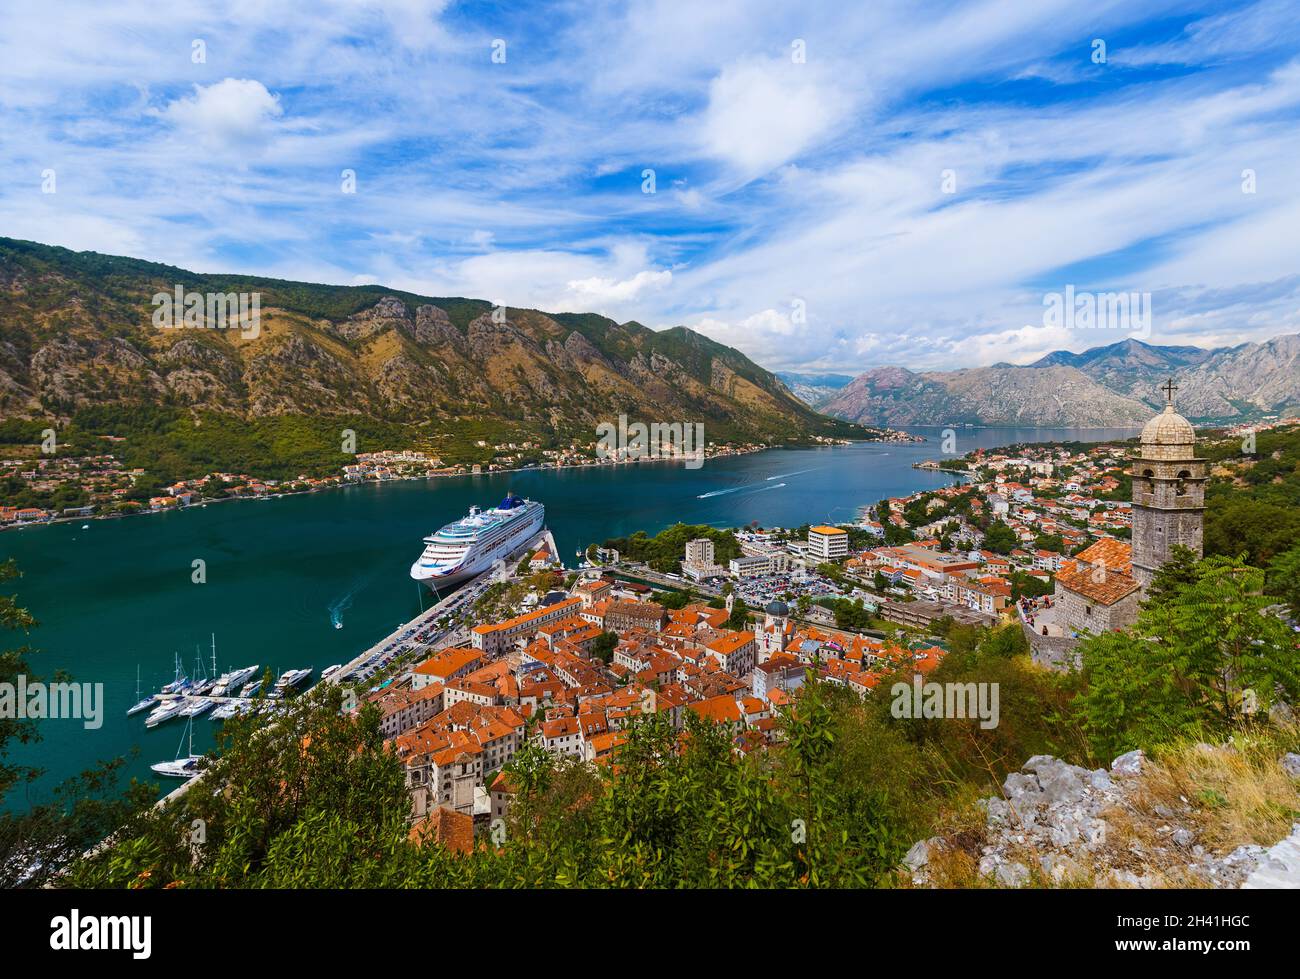 Kotor Bay and Old Town - Montenegro Stock Photo